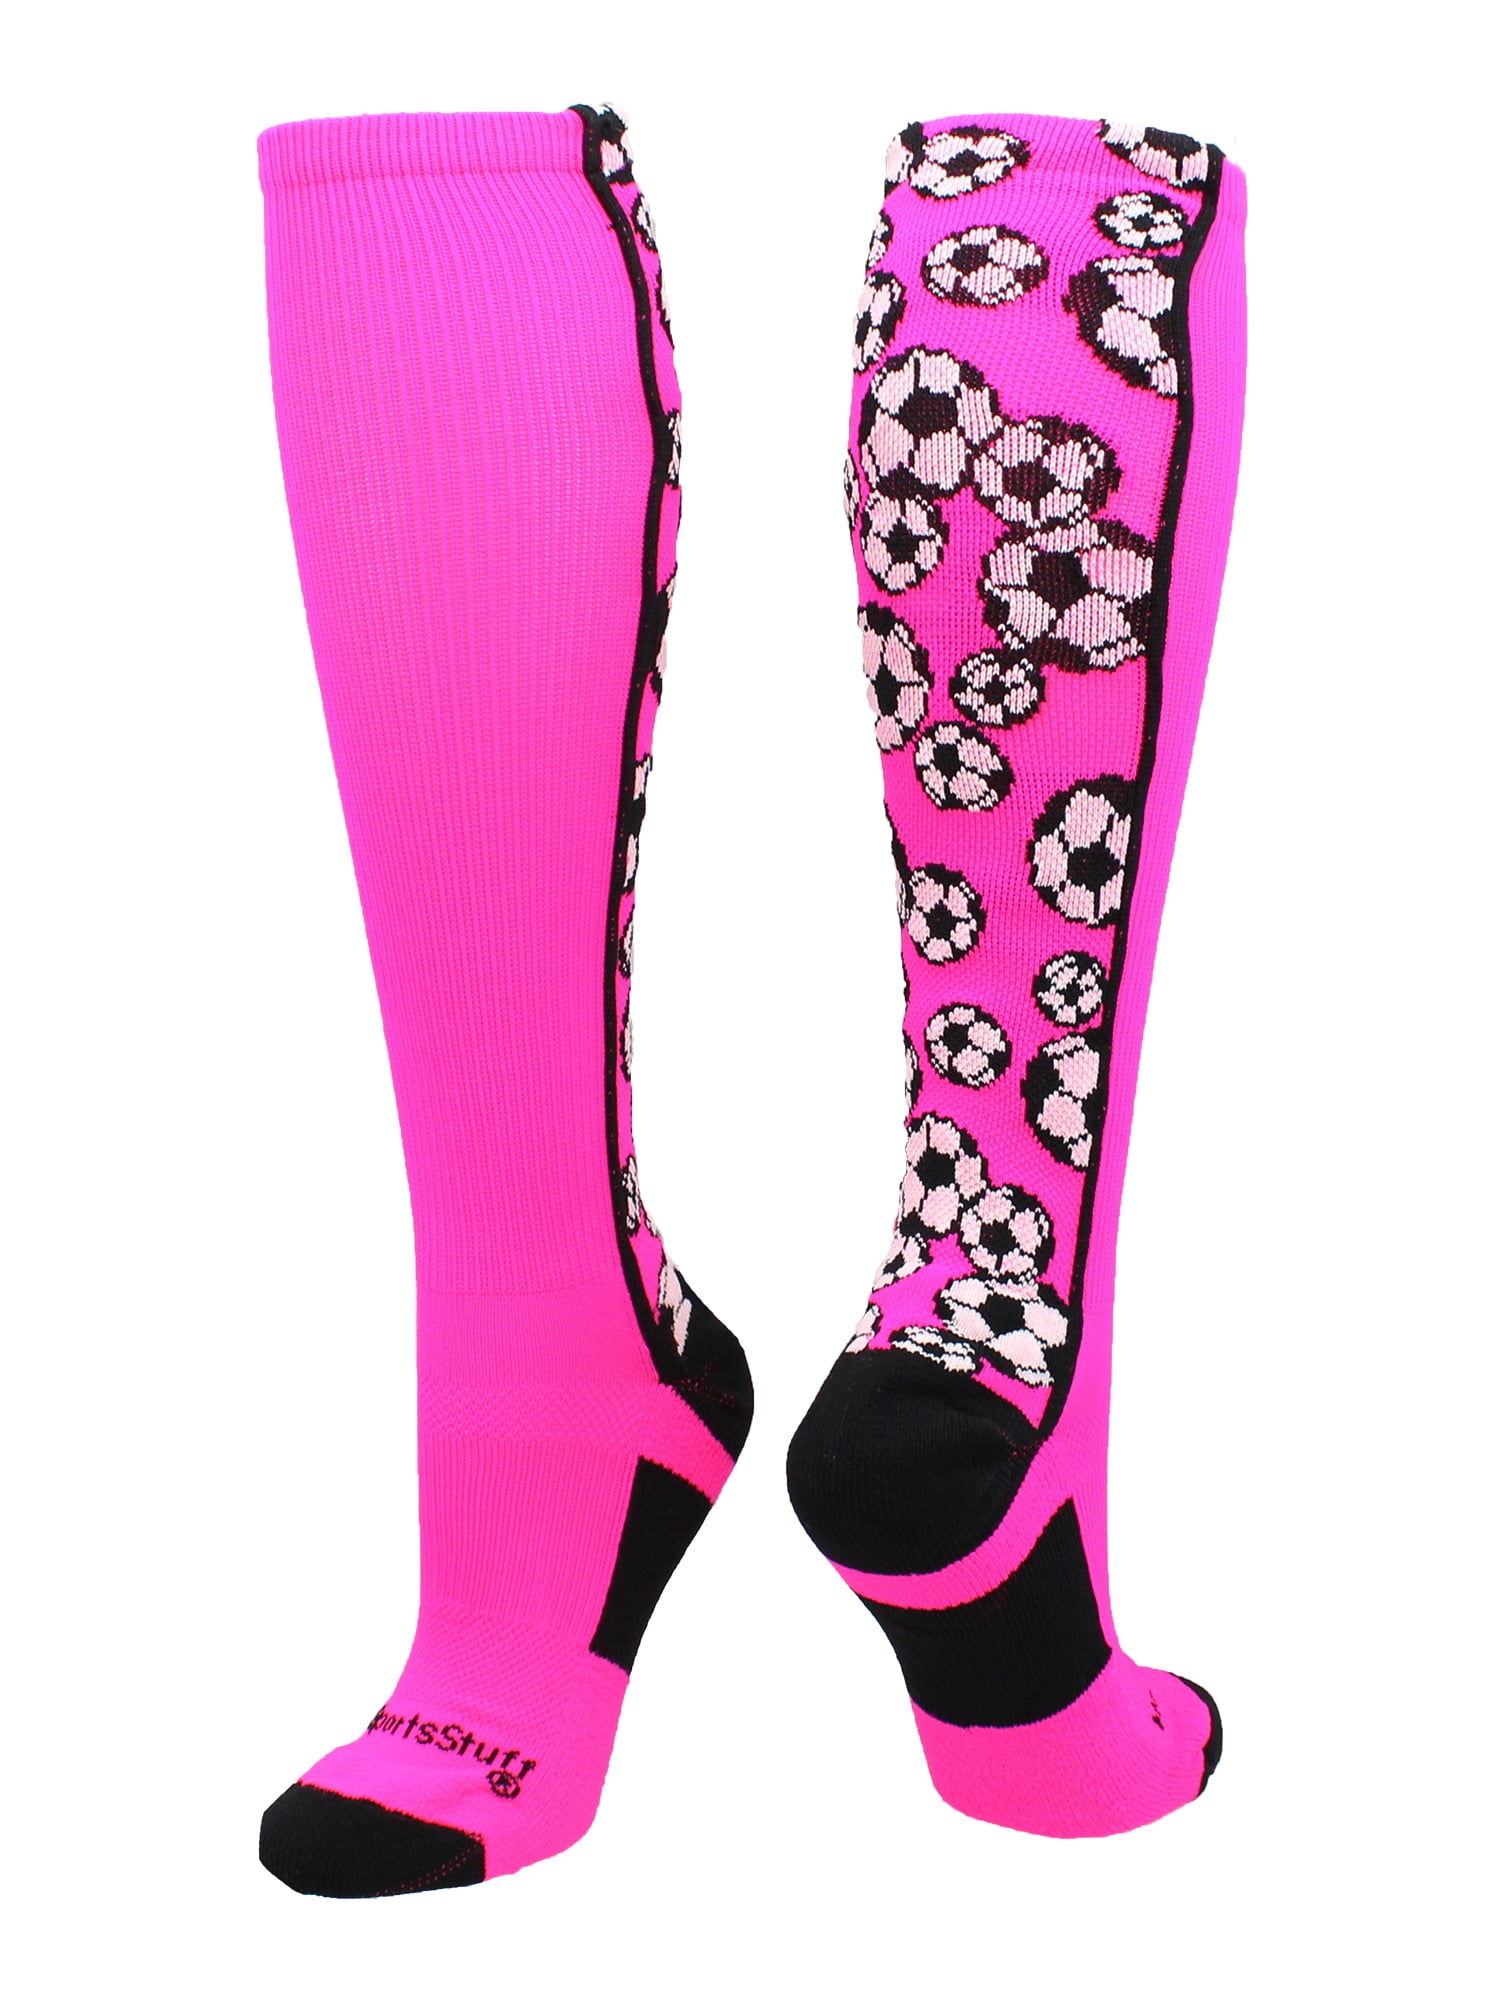 Multiple Colors MadSportsStuff Pink Ribbon Breast Cancer Awareness Camo Over The Calf Socks 